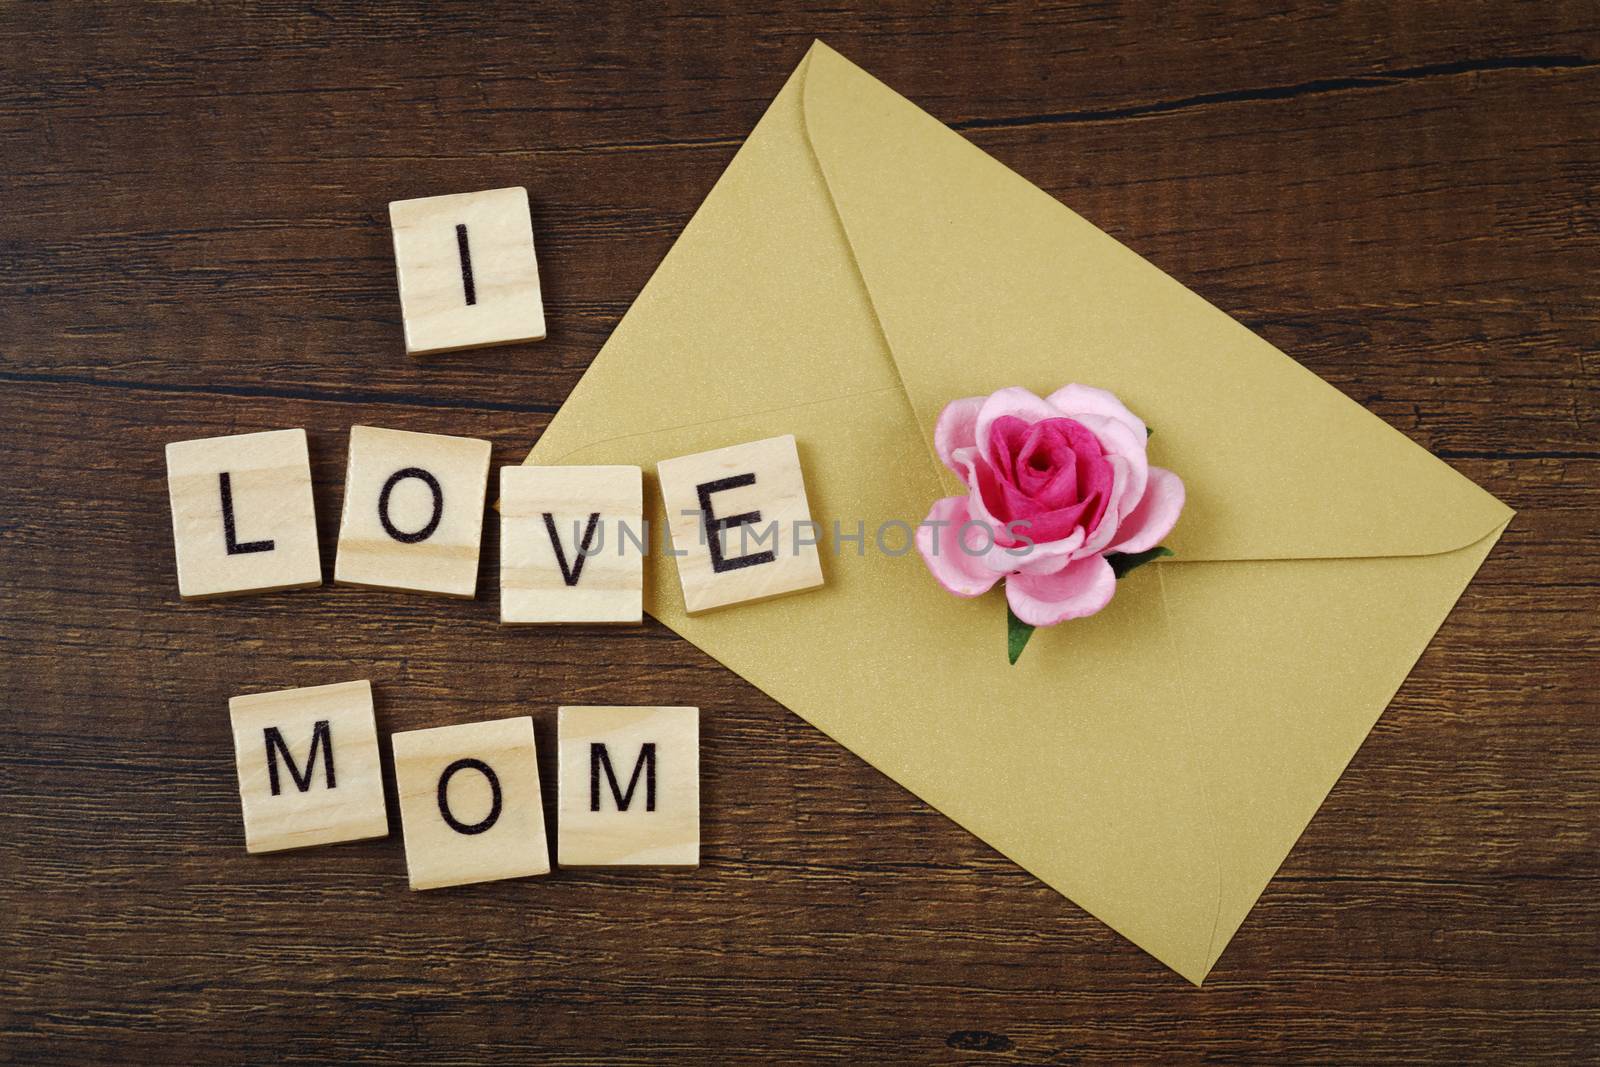 I love mom wording with pink rose flower sign and envelope on old wooden background, Mother's day concept.